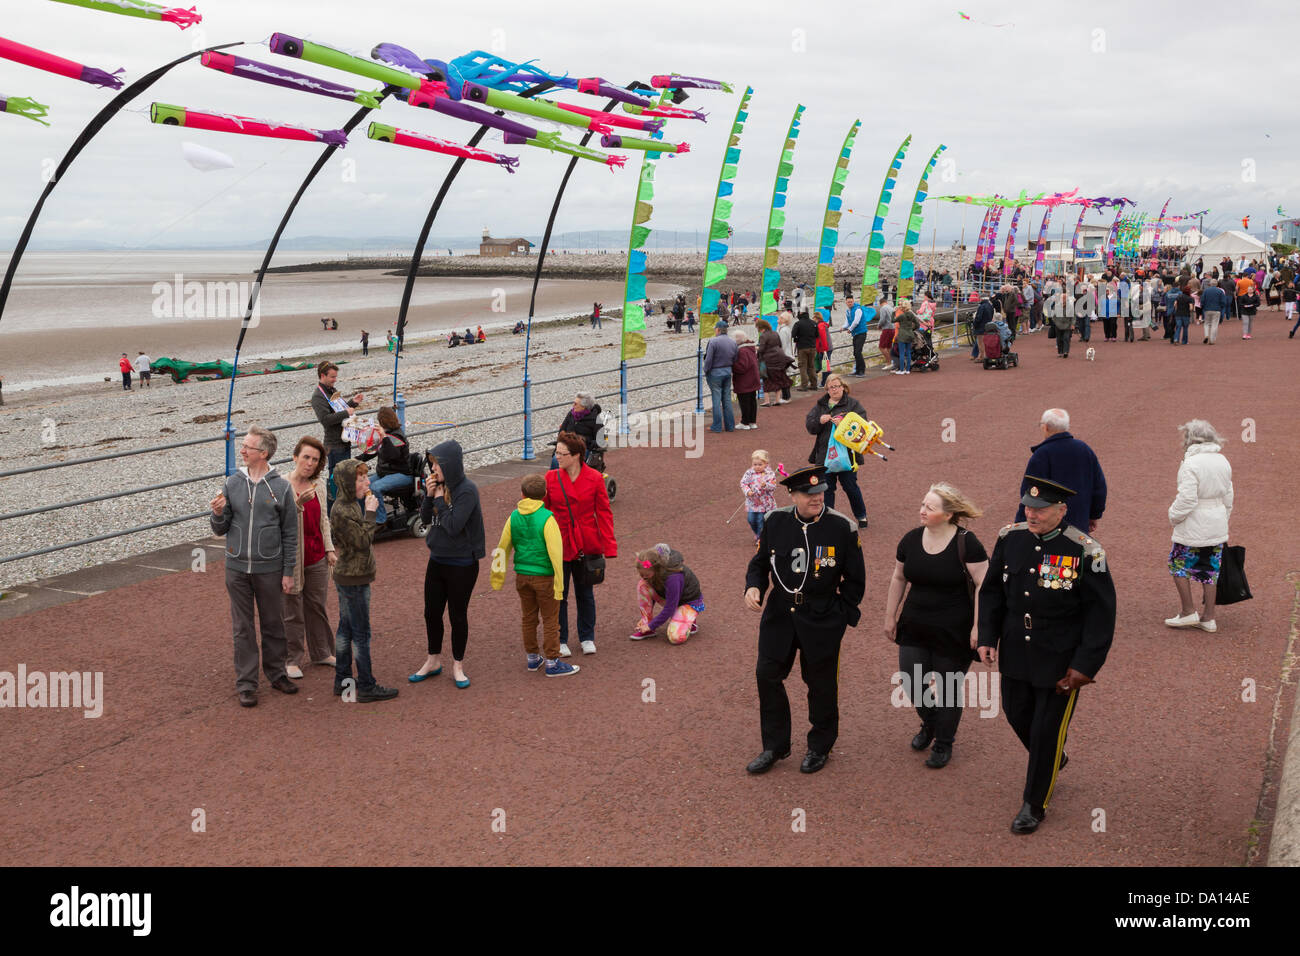 Morecambe, Lancashire, UK. 30th June 2013. Morecambe Bay Catch The Wind Kite Festival 2013 UK The prom during the festival Credit:  Andrew Ward/Alamy Live News Stock Photo